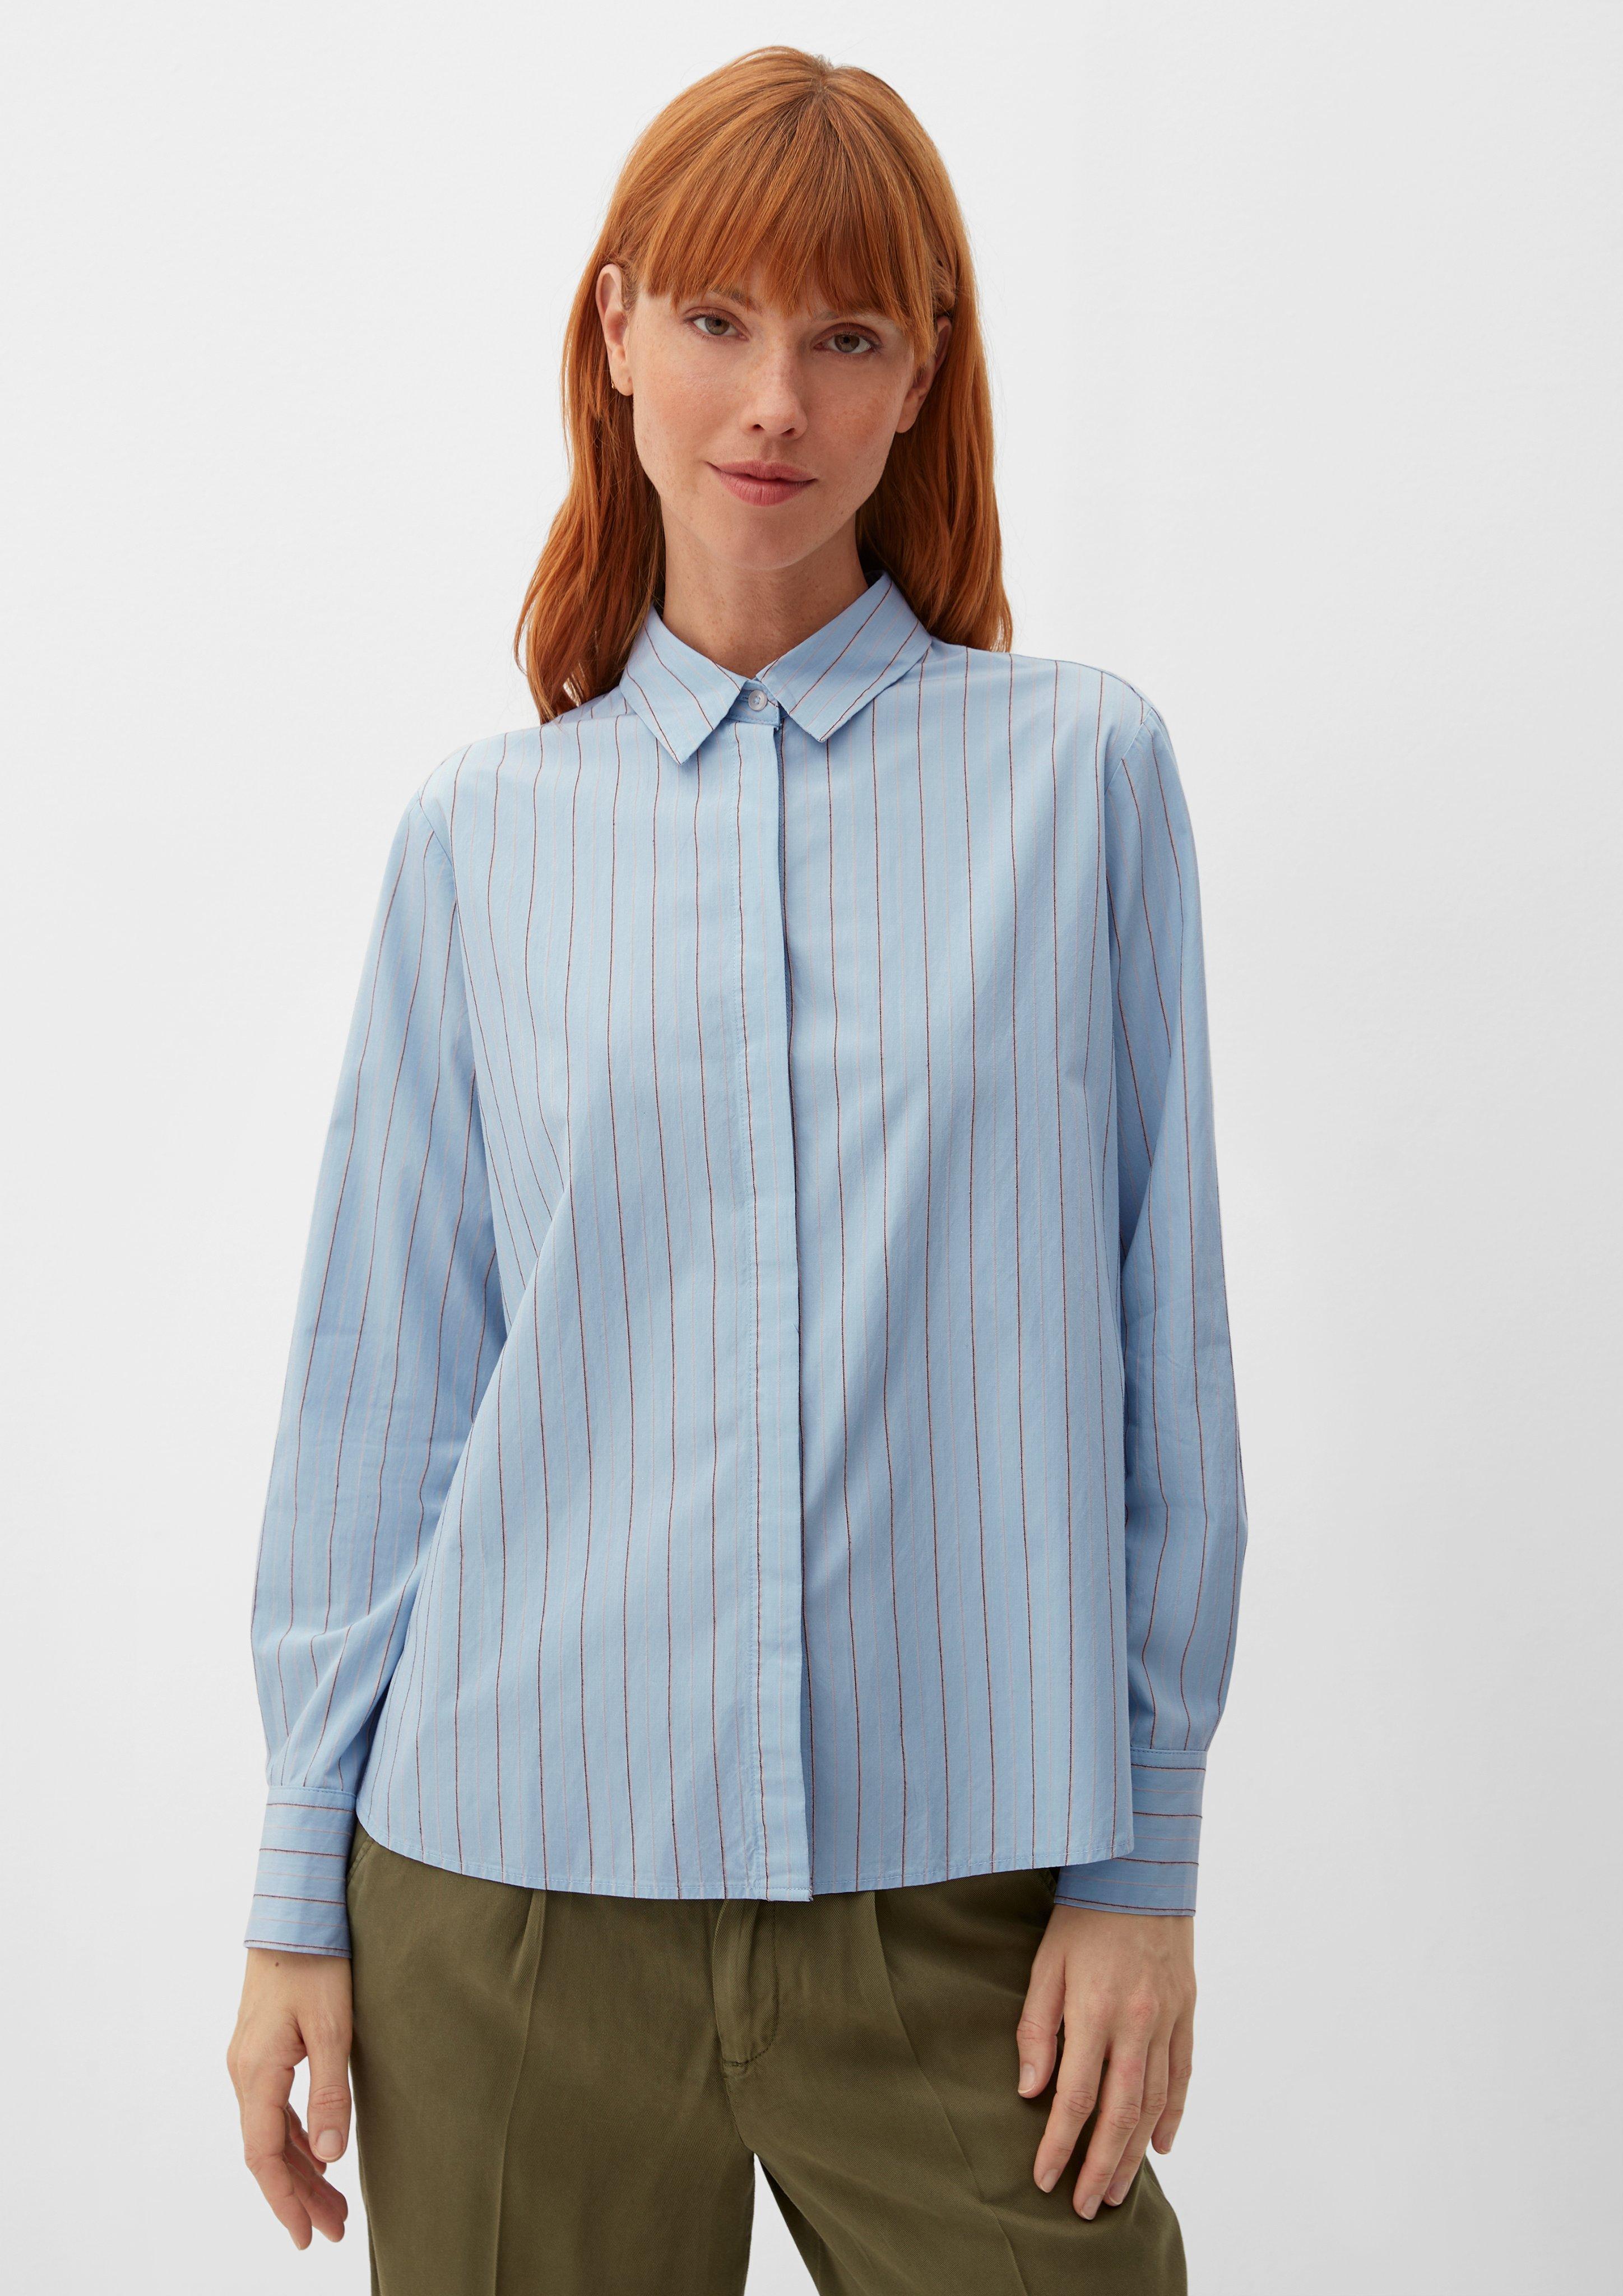 Rayon blouse with stripes - light blue | s.Oliver